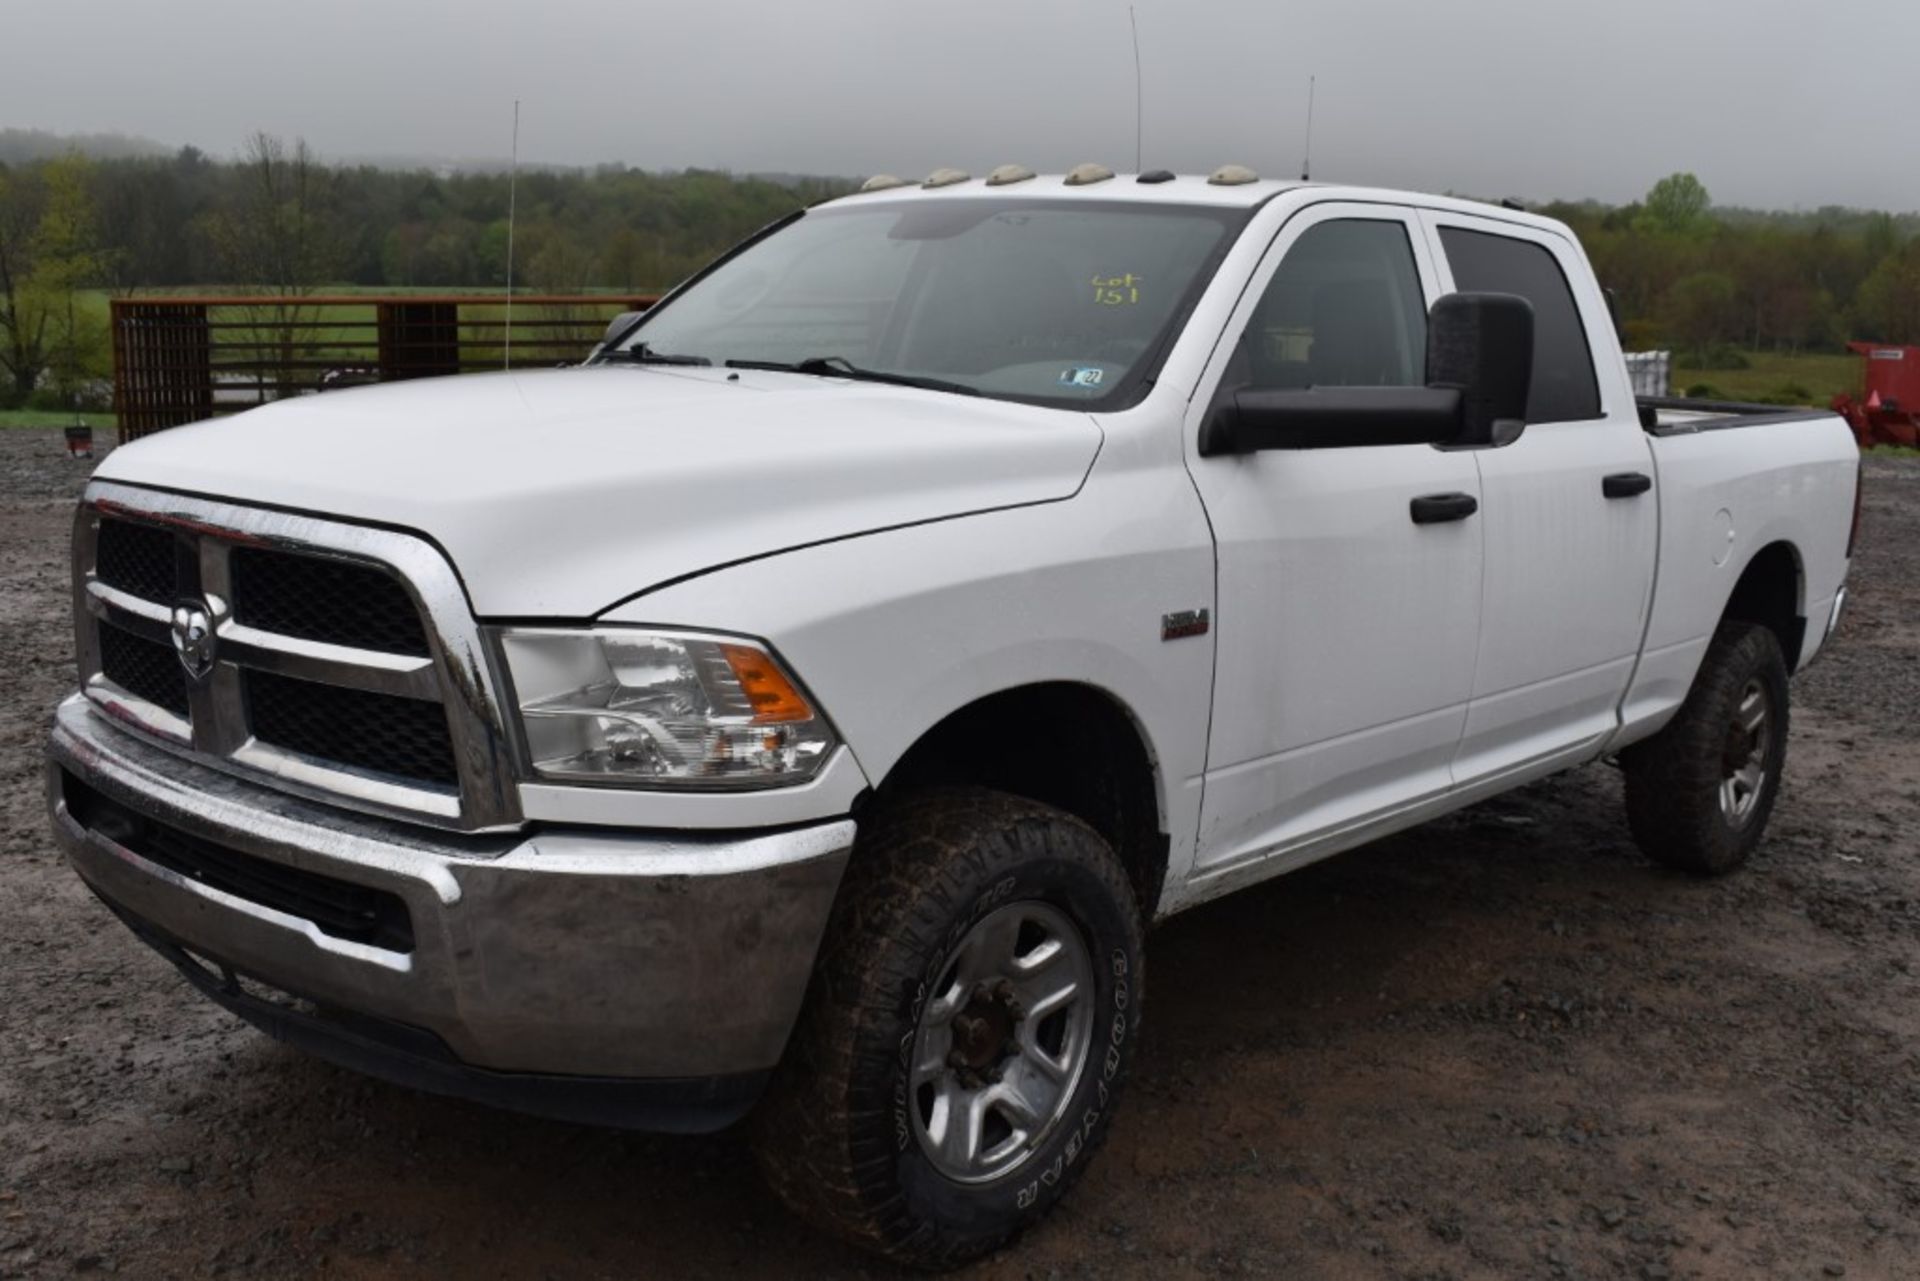 2014 Dodge Ram 2500 Truck With Title, 194341 Miles, Runs and Drives, Hemi 5.7 Gas Engine, Automatic,